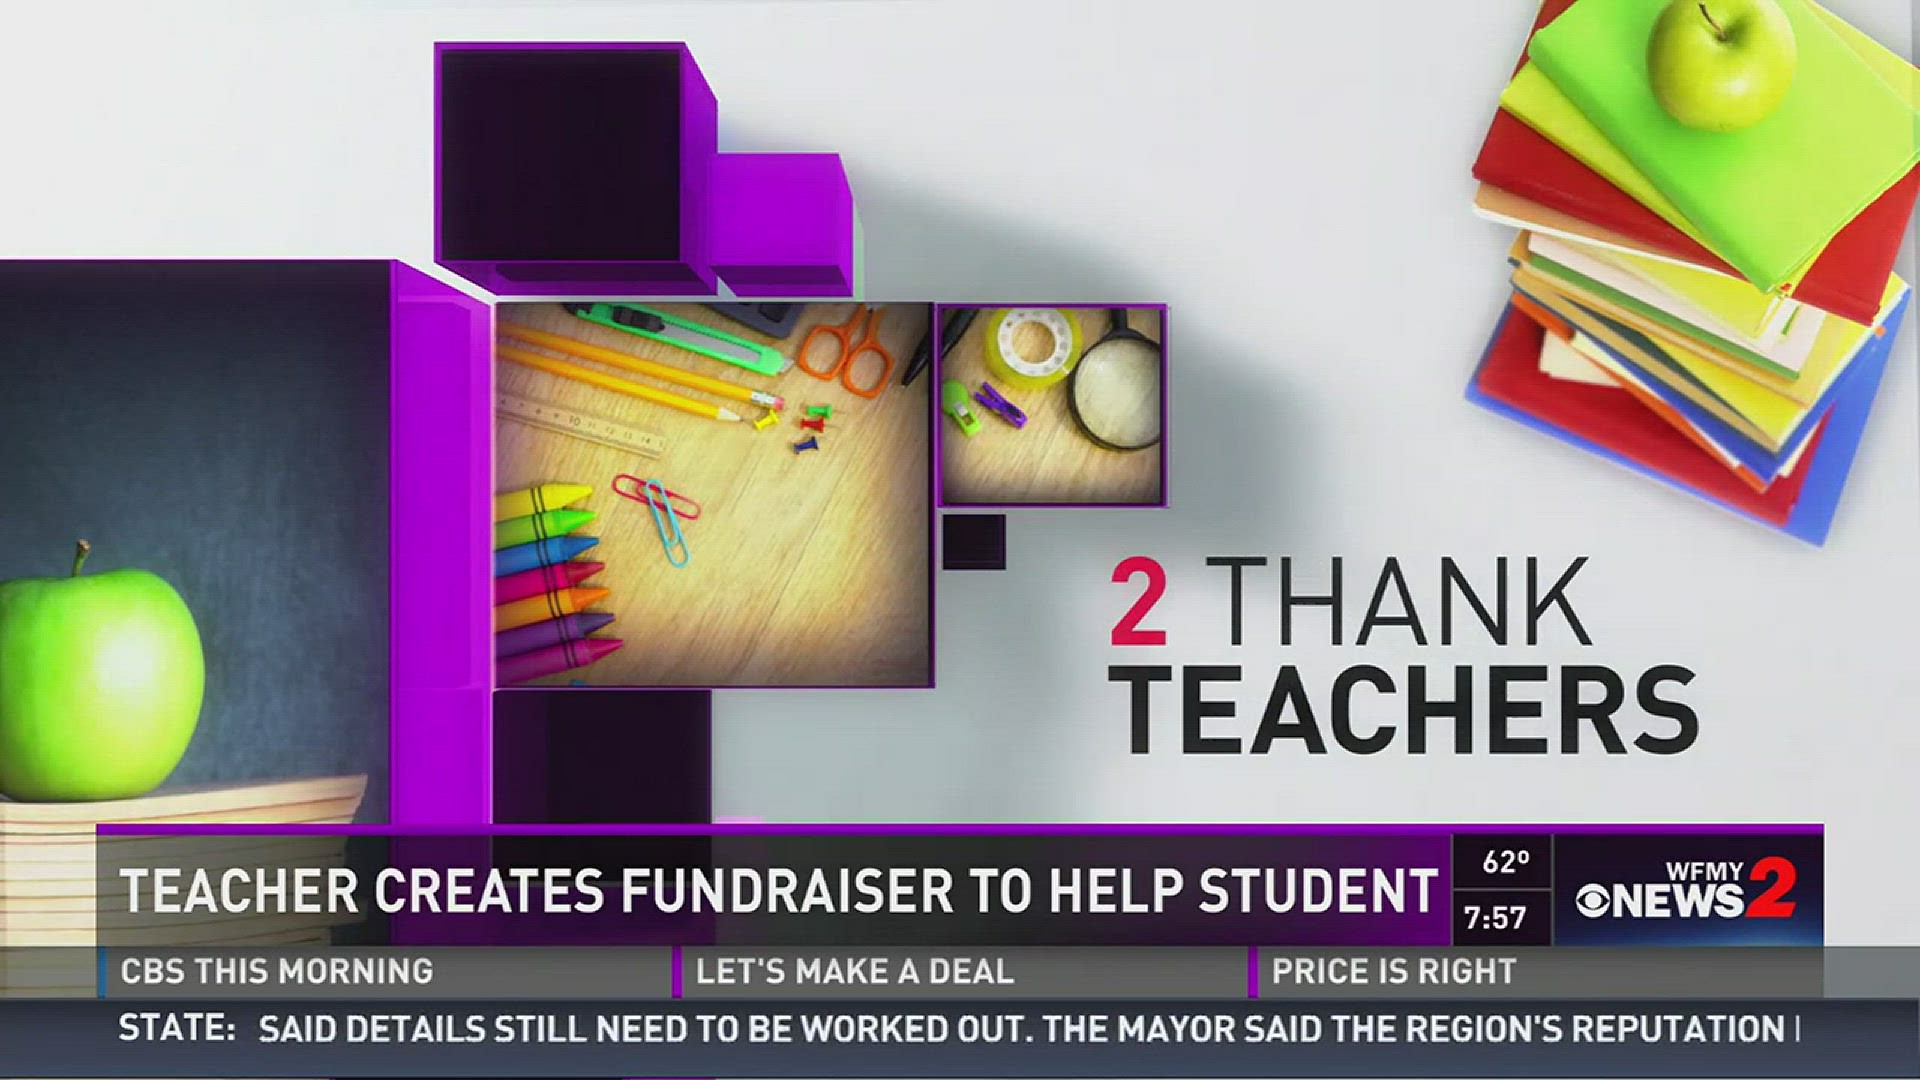 Teacher Steps Up To Help Student With Cancer